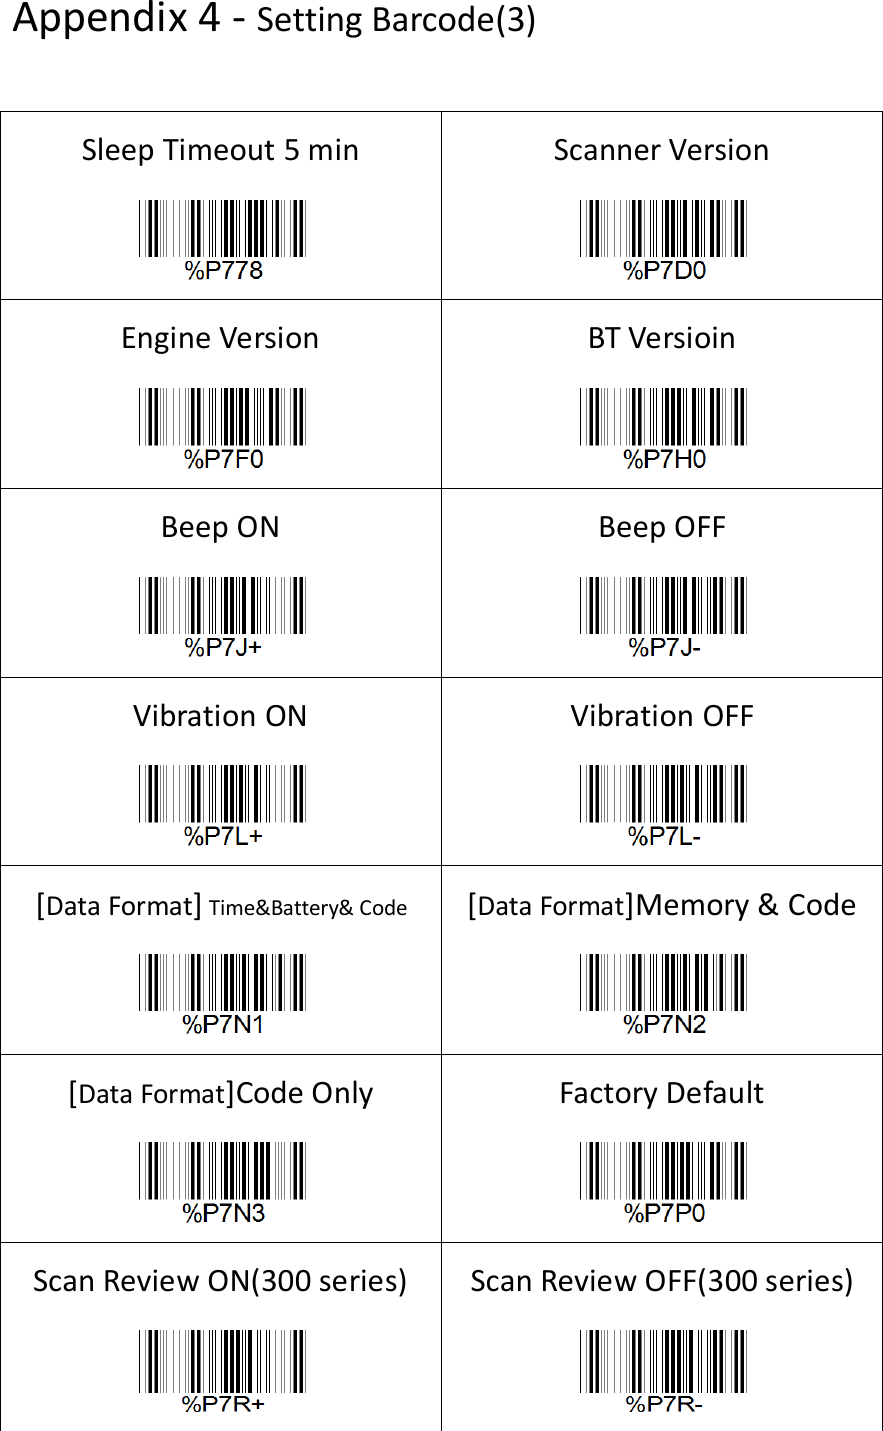 Appendix 4 - Setting Barcode(3) Sleep Timeout 5 min    Scanner Version  Engine Version  BT Versioin  Beep ON  Beep OFF  Vibration ON  Vibration OFF  [Data Format] Time&amp;Battery&amp; Code  [Data Format]Memory &amp; Code  [Data Format]Code Only  Factory Default  Scan Review ON(300 series)  Scan Review OFF(300 series)  